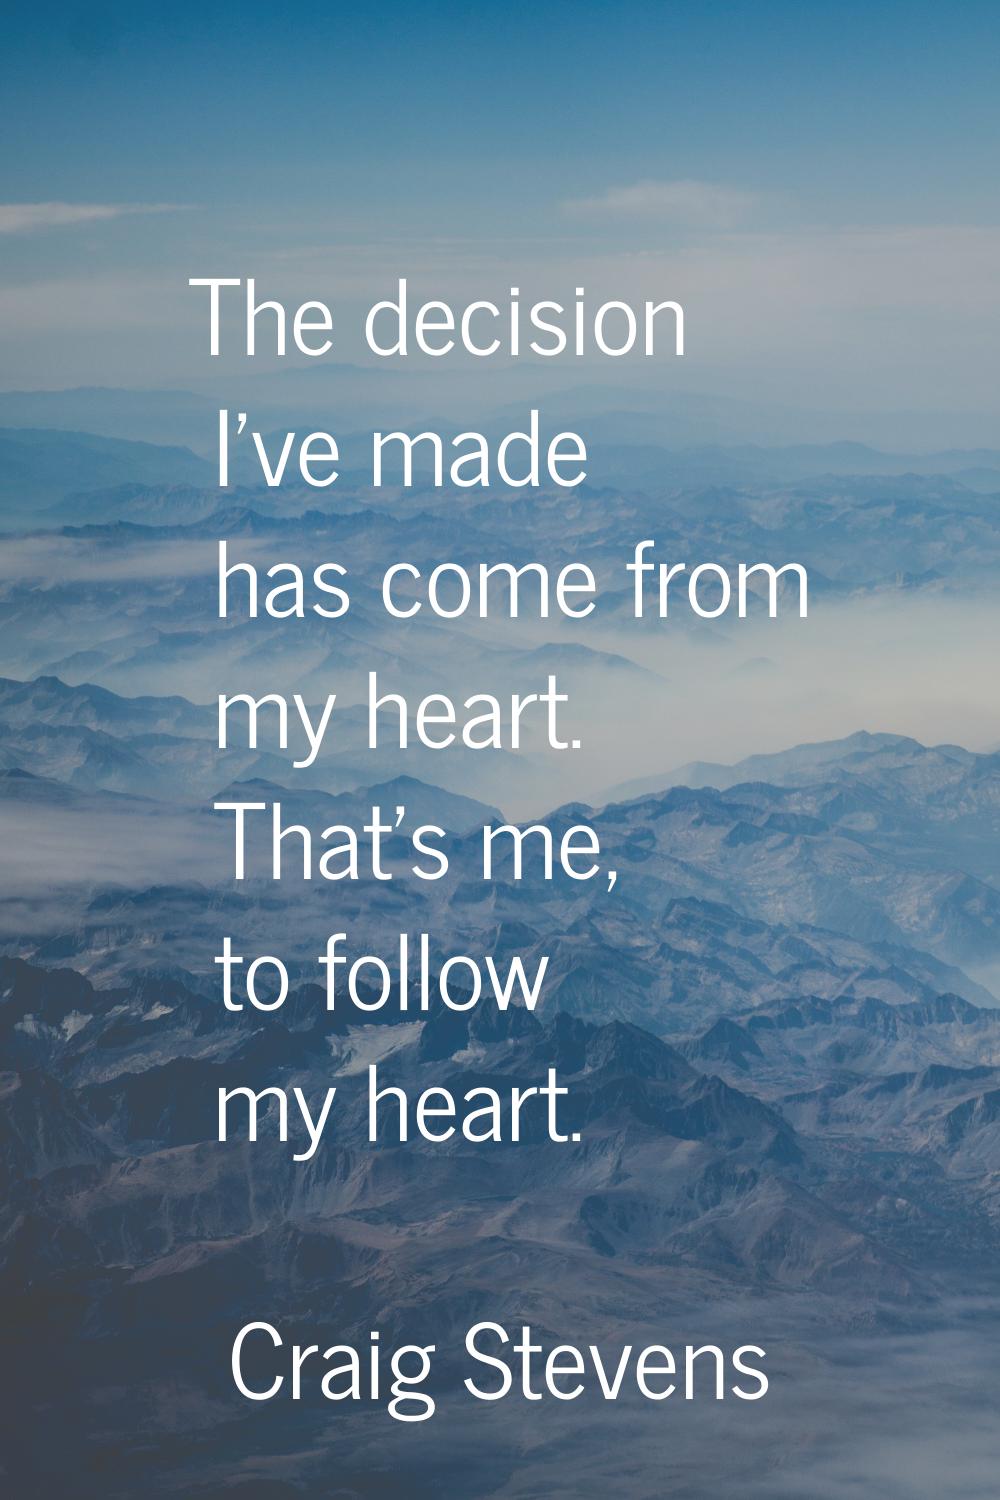 The decision I've made has come from my heart. That's me, to follow my heart.